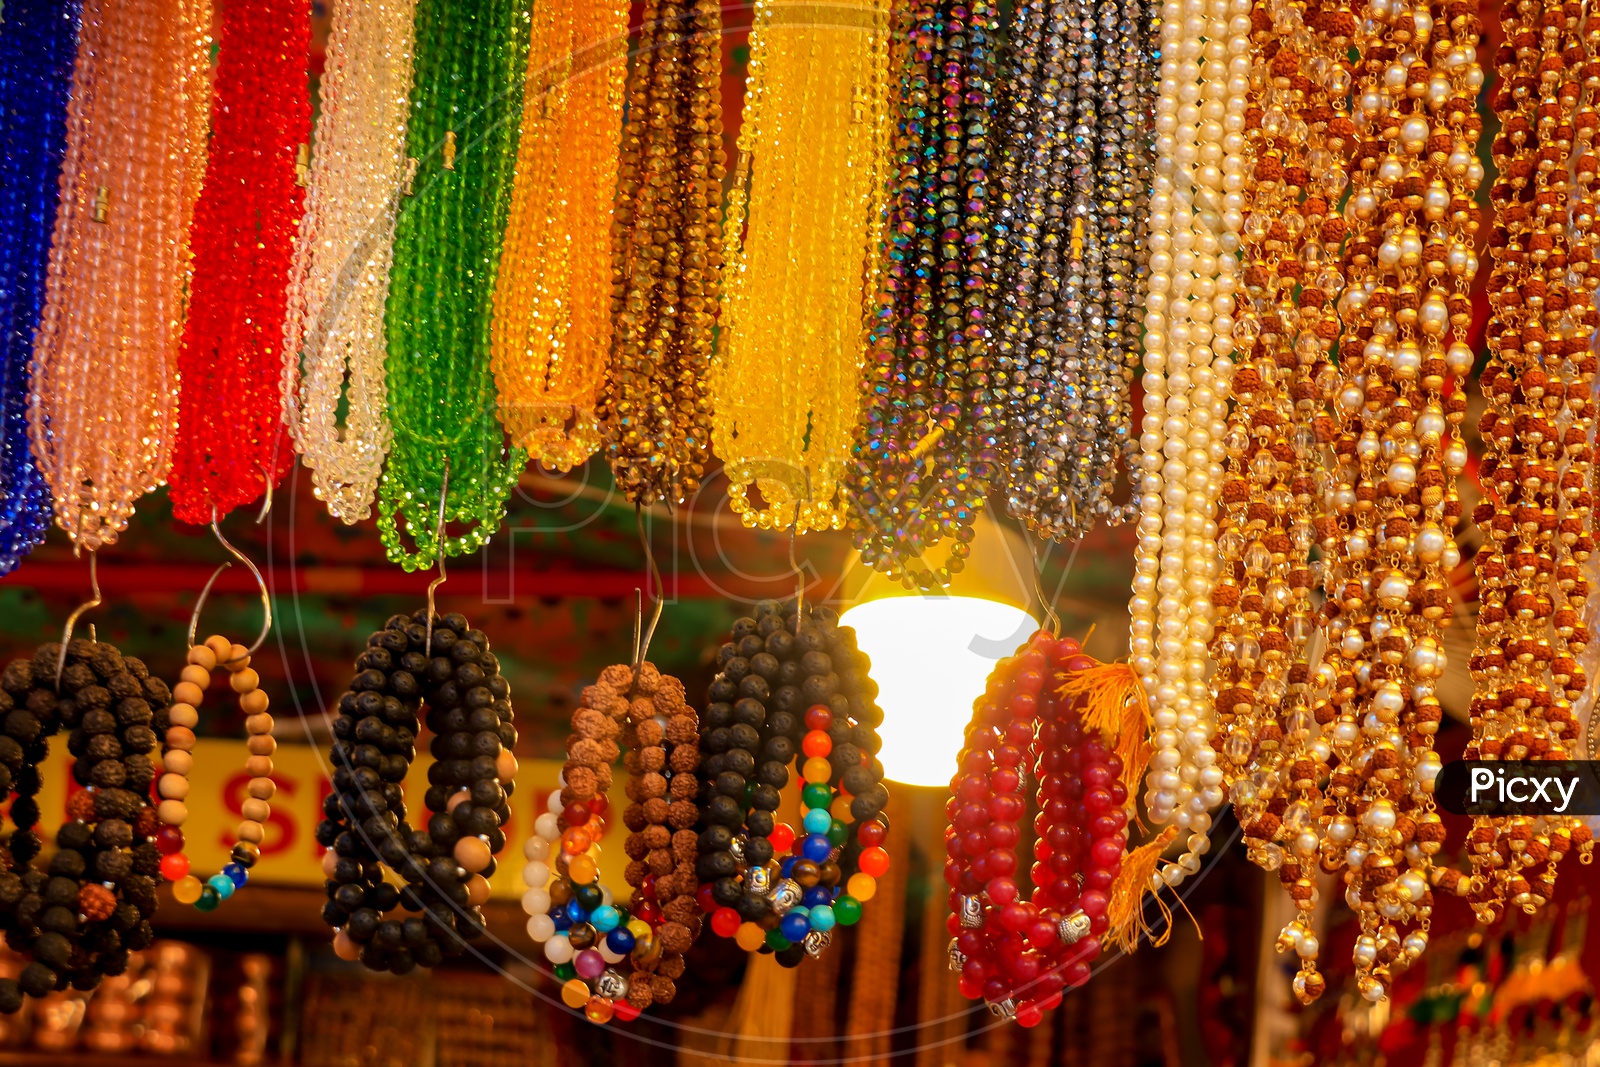 Display of colorful beaded chains